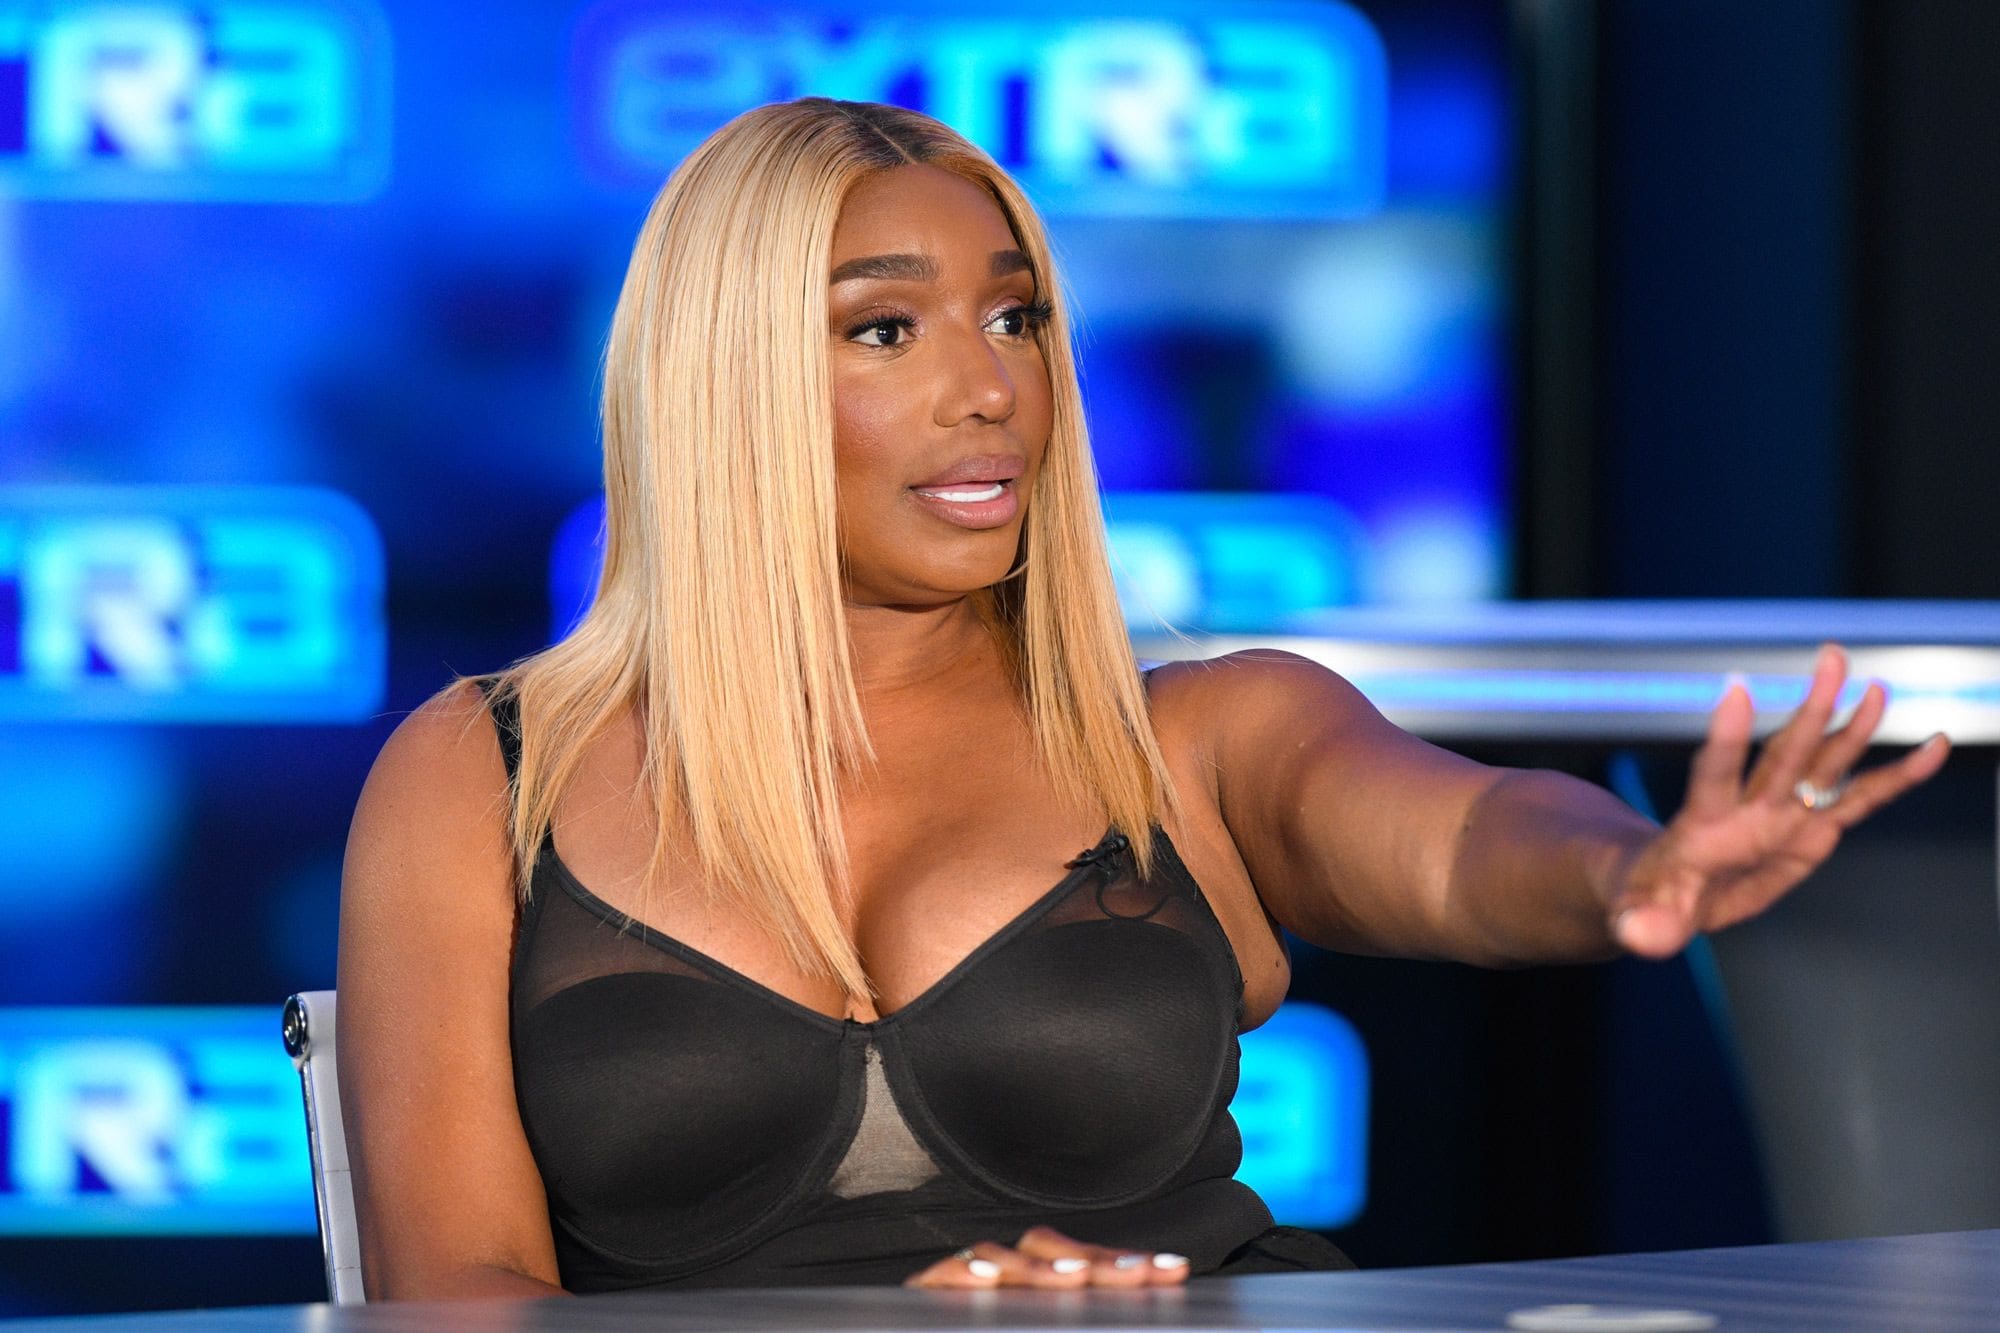 NeNe Leakes Looks Gorgeous In Her Latest Photo - See It Here